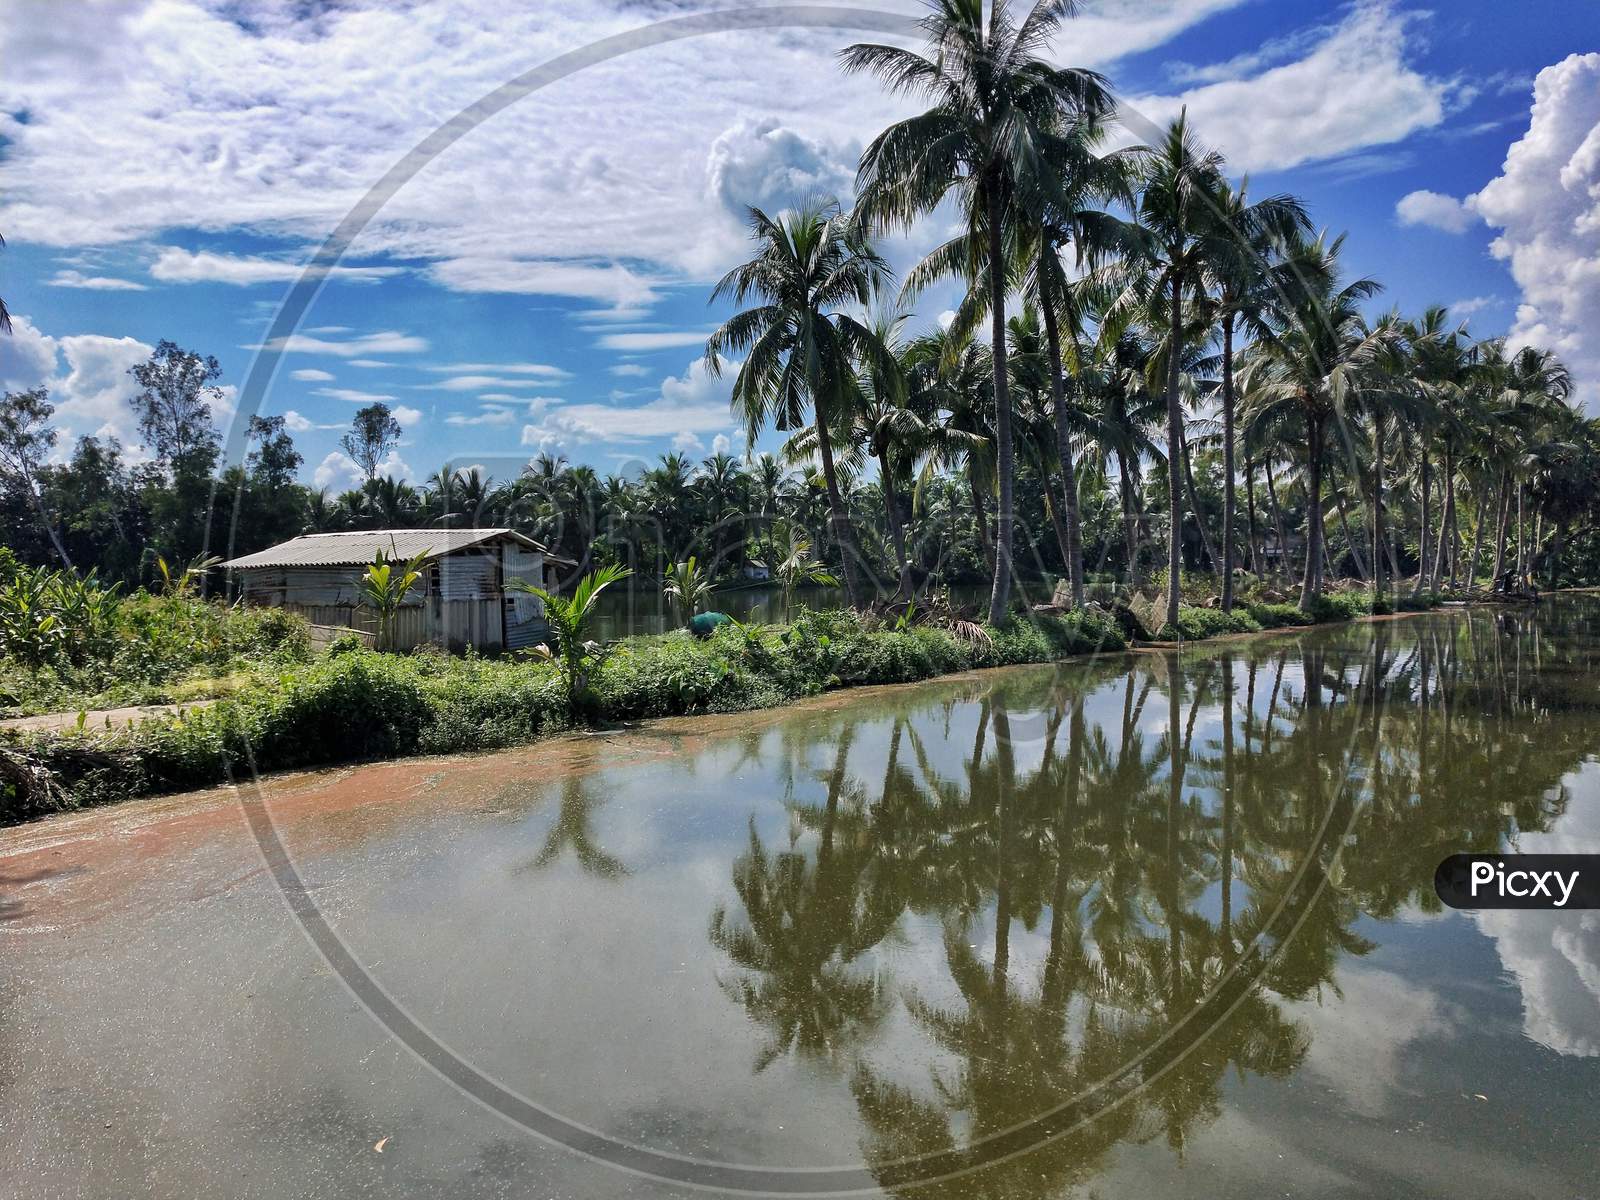 reflection of coconut trees on water, hut